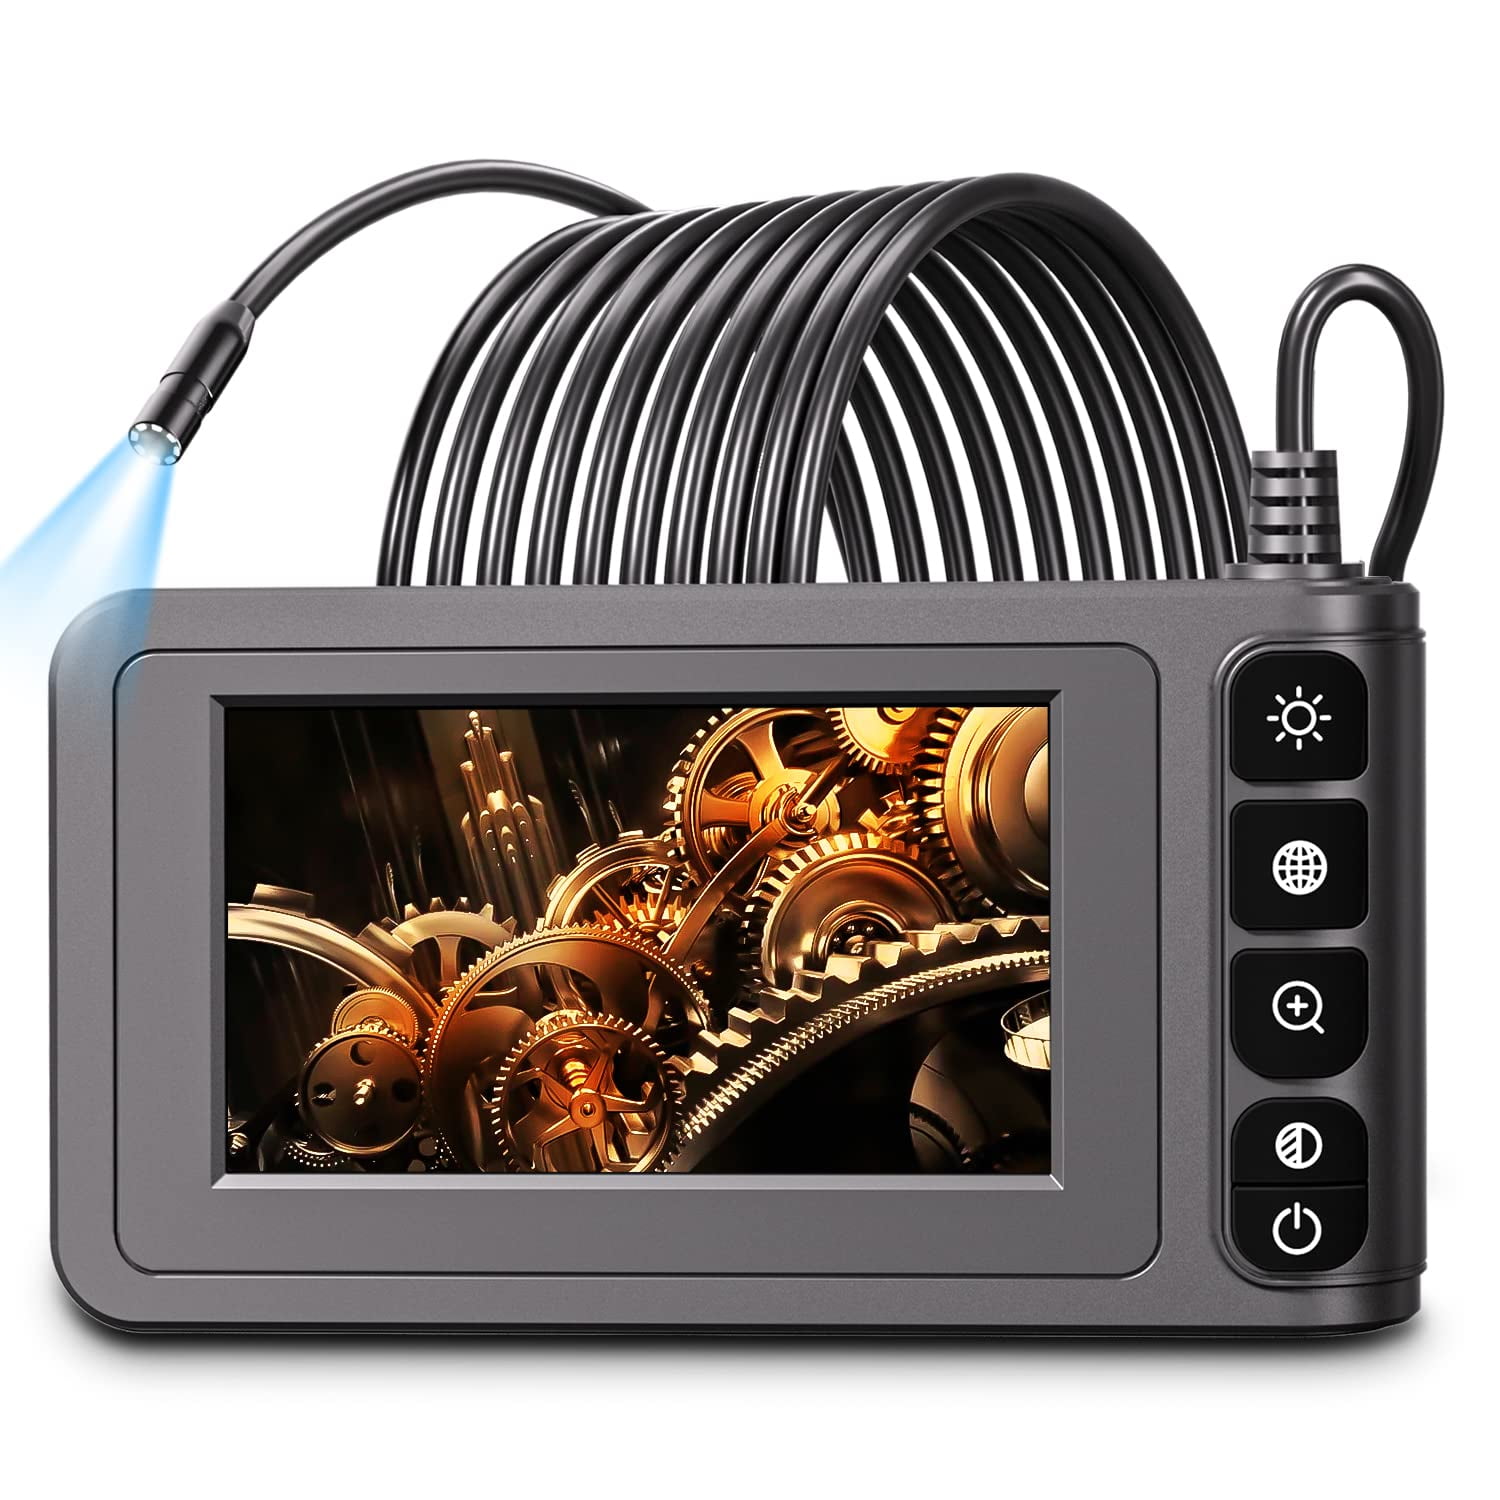 Industrial Endoscope, SKYBASIC 1080P HD Digital Borescope Inspection Camera  Waterproof 4.3LCD Screen Snake Camera with 32GB TF Card, 6 Adjustable LED  Lights, Semi-Rigid Cable, Four Accessor 